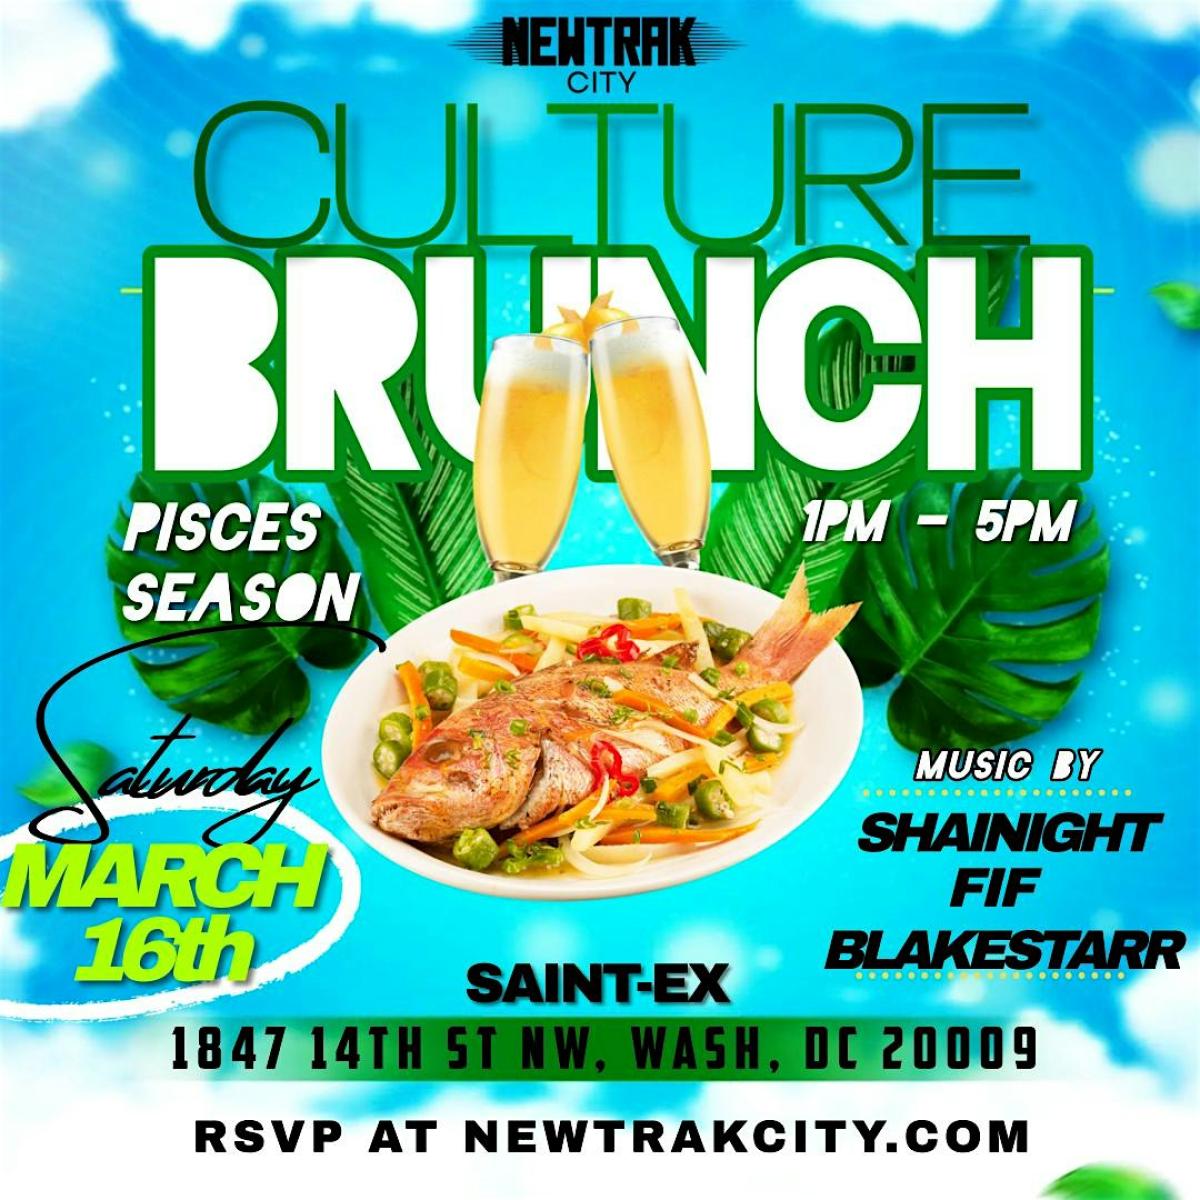 Culture Brunch flyer or graphic.